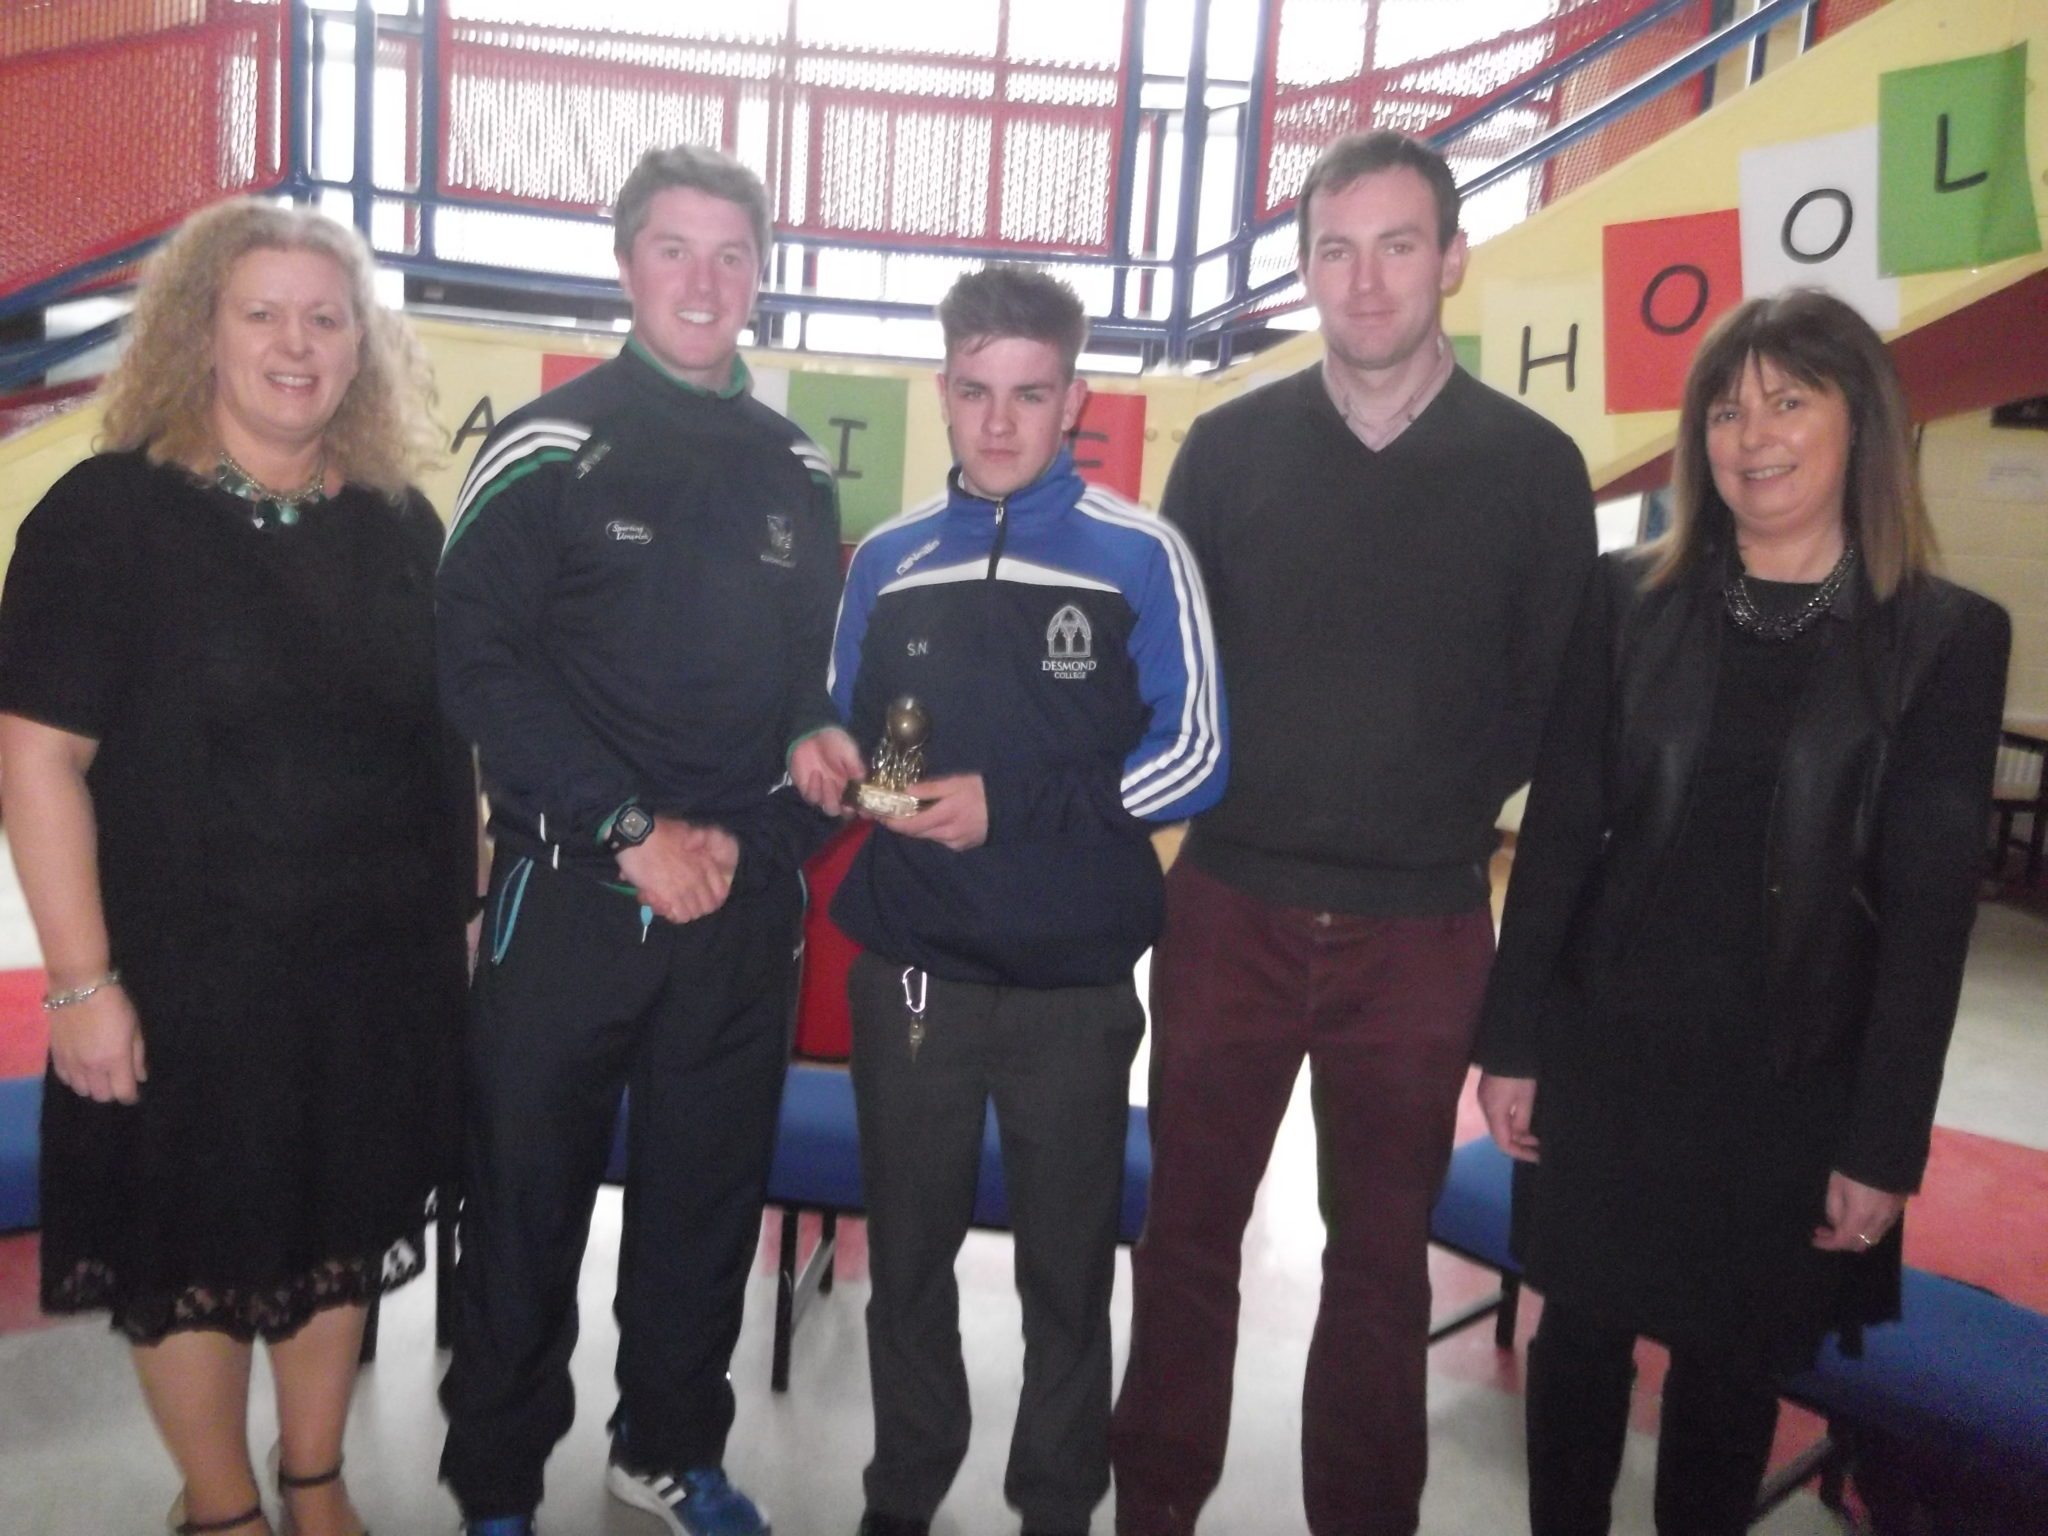 Shane Normoyle being present with his trophie by Eoin Ryan. Also in the photo Ms Gavin Barry, Mr Burke and Ms Cregan.